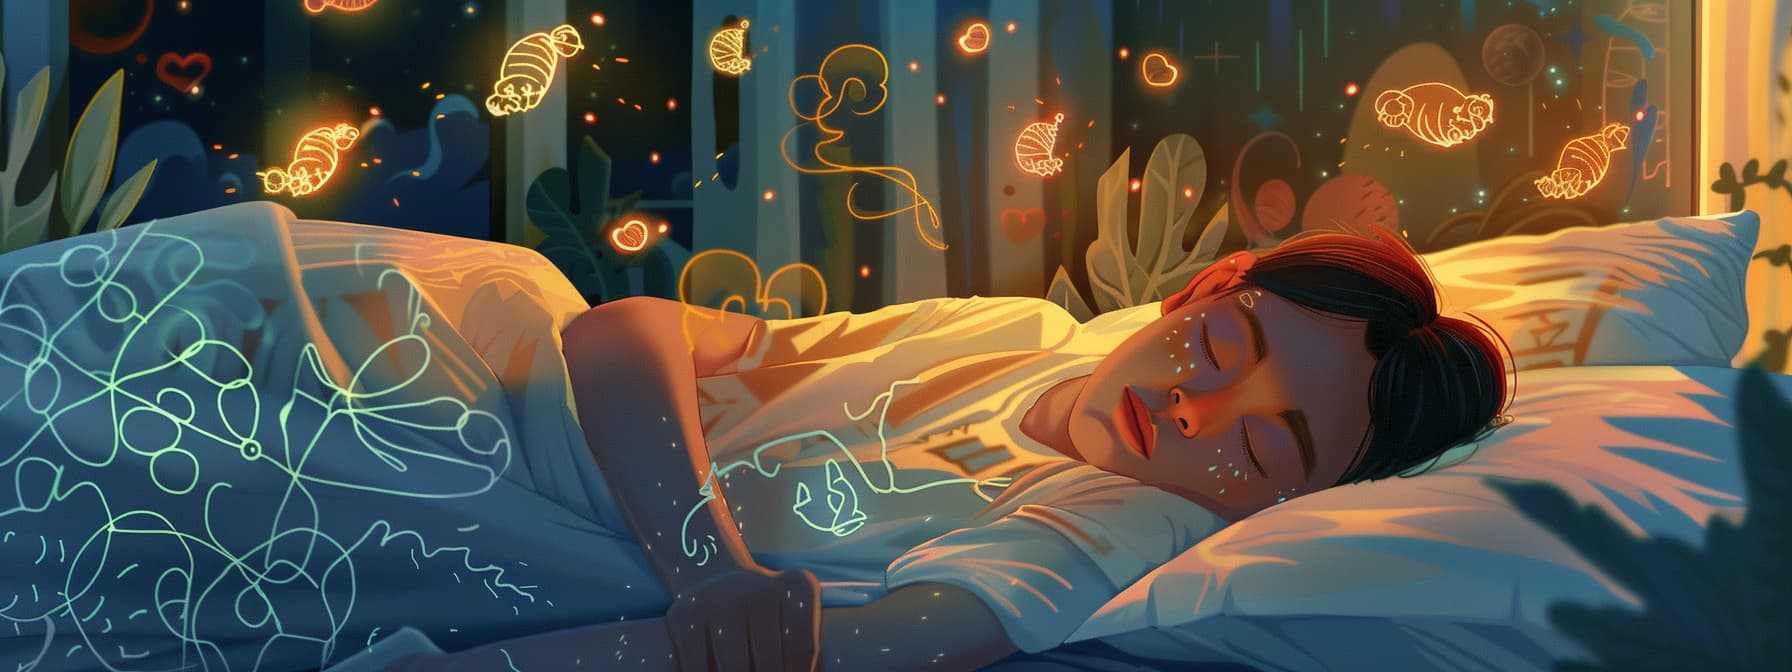 2 - A person peacefully sleeping in a cozy, warmly lit room, surrounded by dream-like illustrations floating around them, representing recurring themes in their dreams - Dream Journal Promp